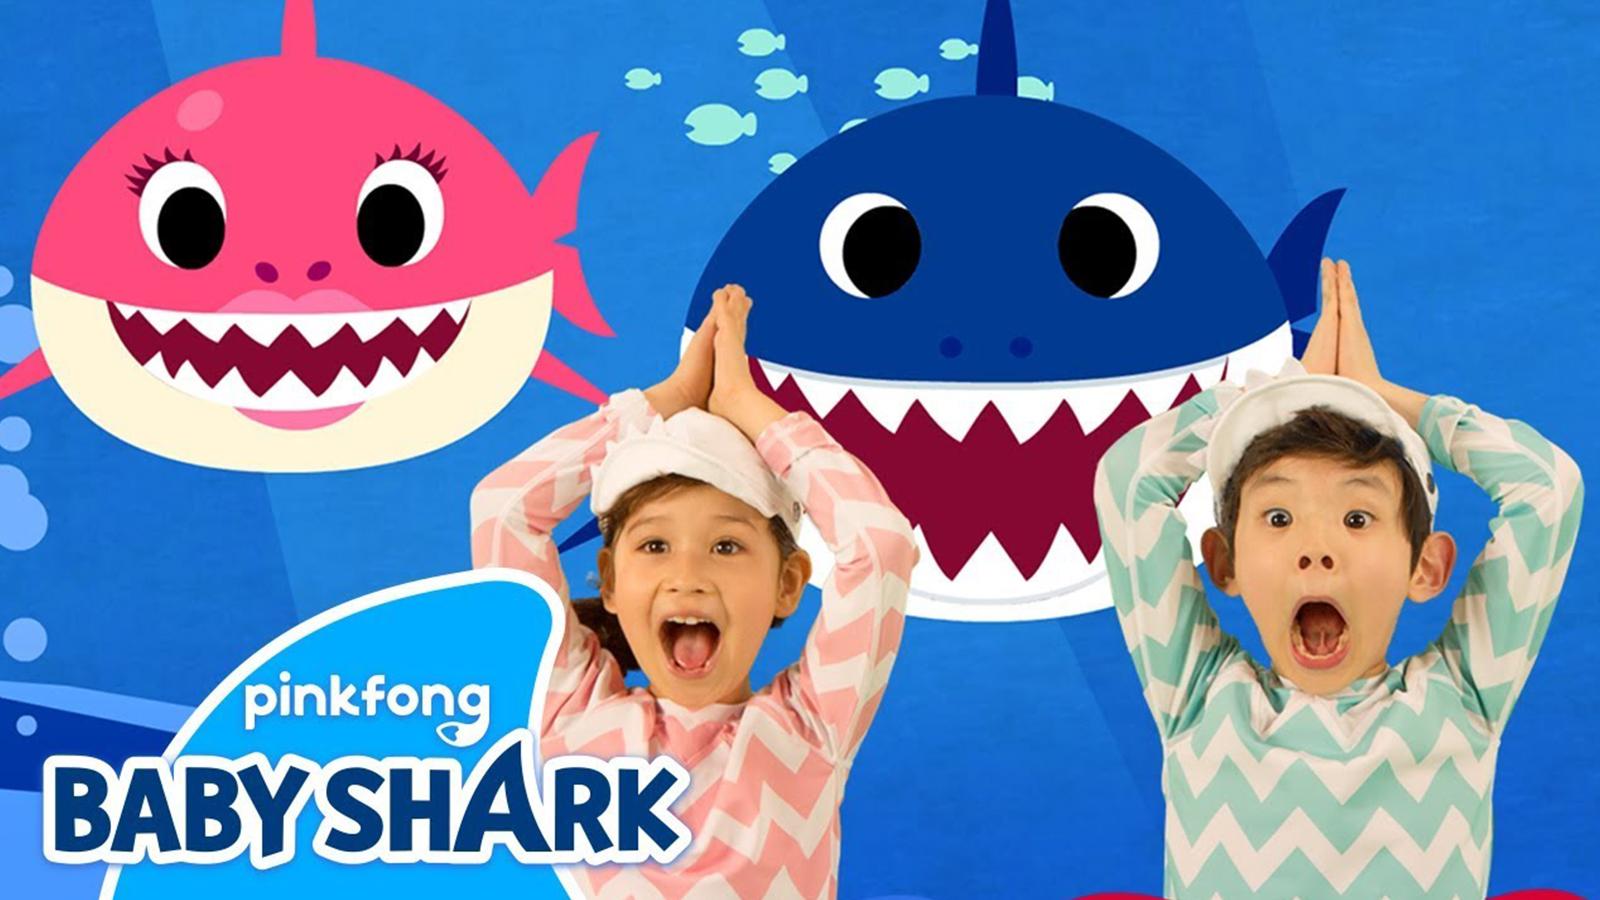 Two children dance to the Baby Shark song against an ocean background.